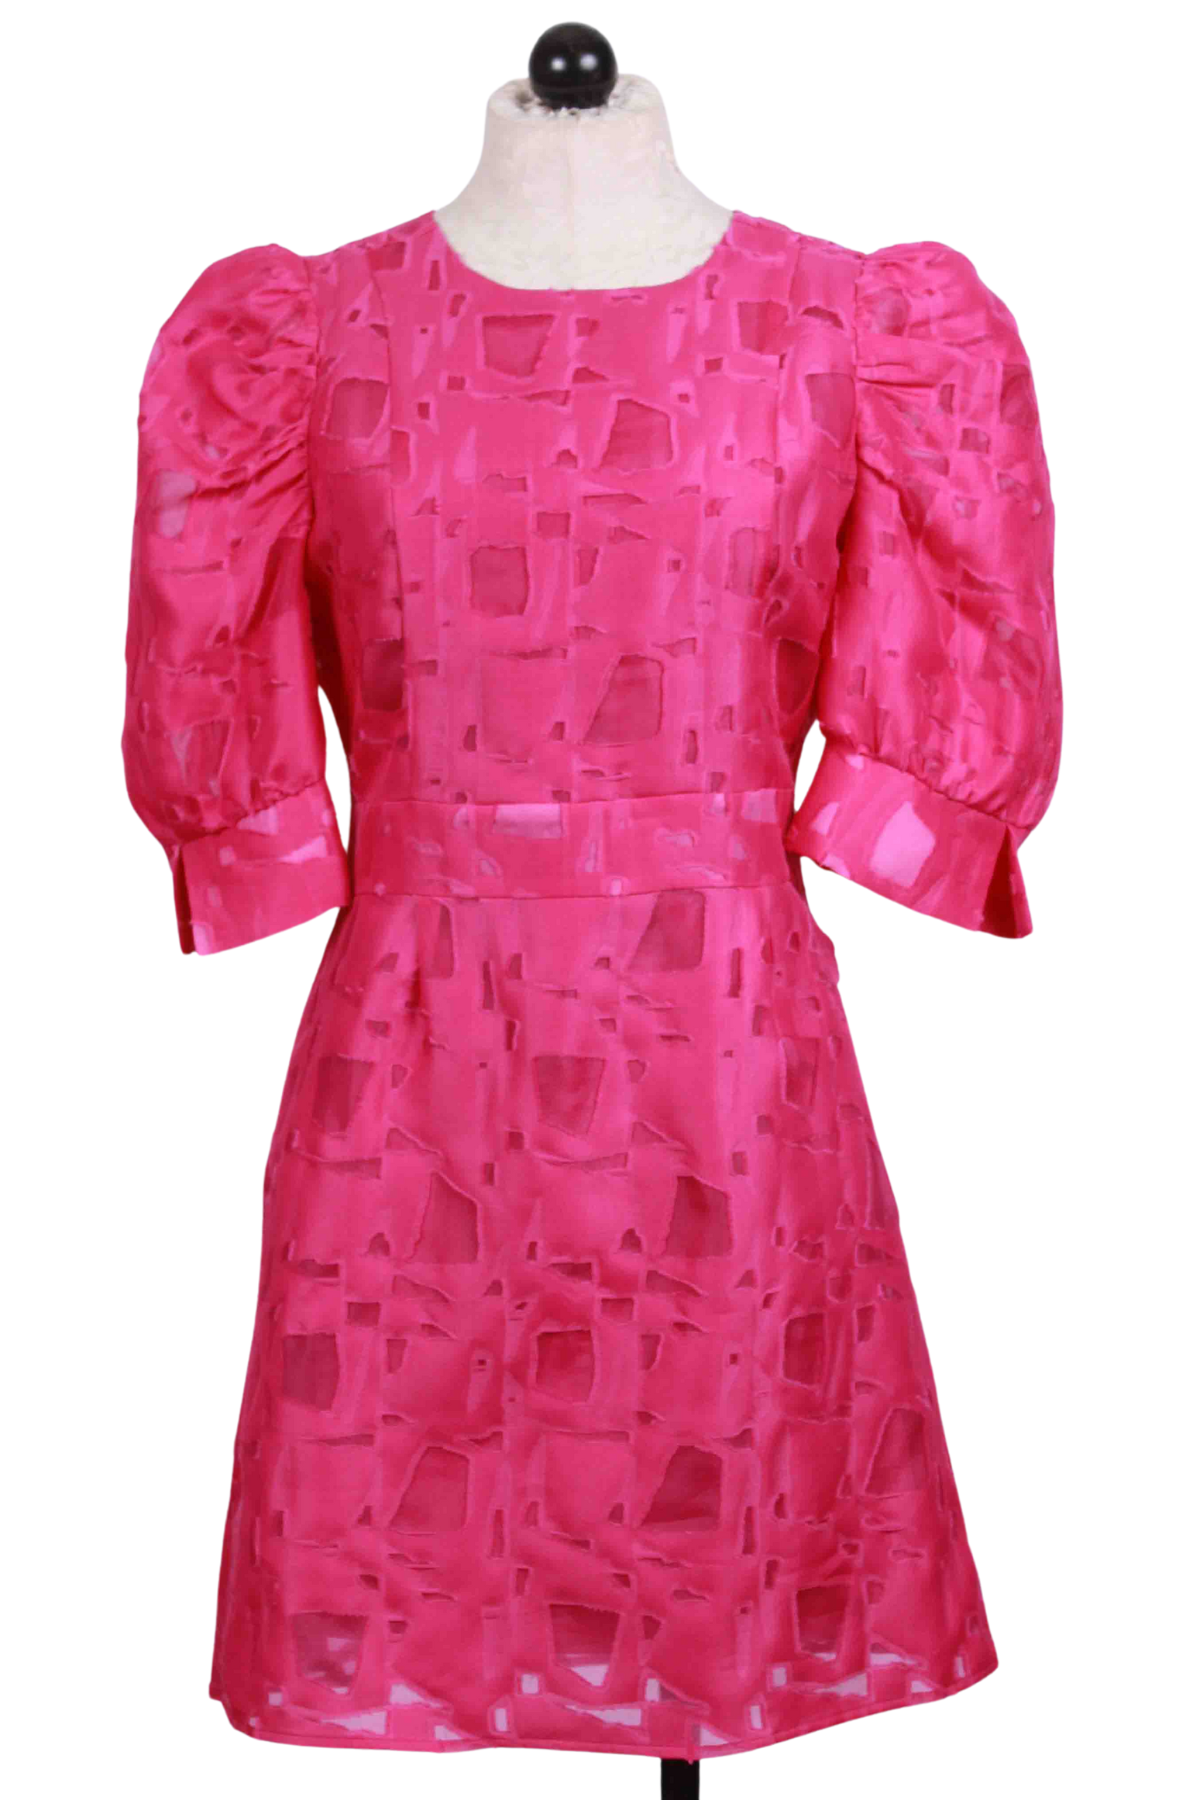 Raspberry Parker Dress by Marie Oliver comes